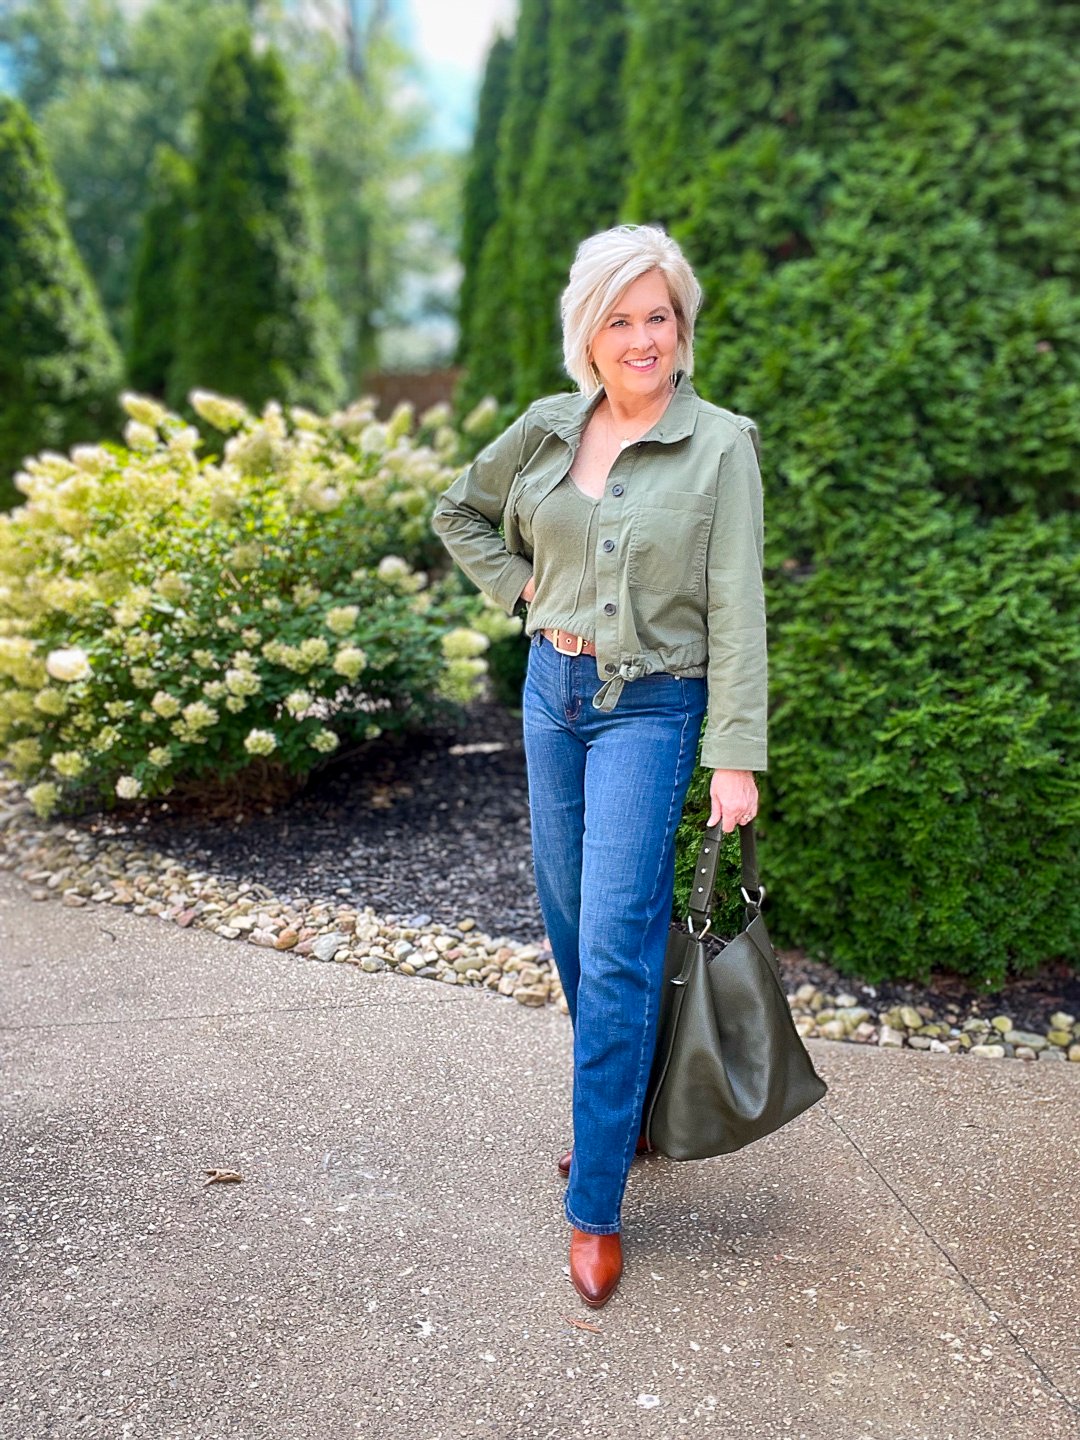 Over 40 Fashion Blogger, Tania Stephens is wearing an olive green jacket and sweater tank from Banana Republic16